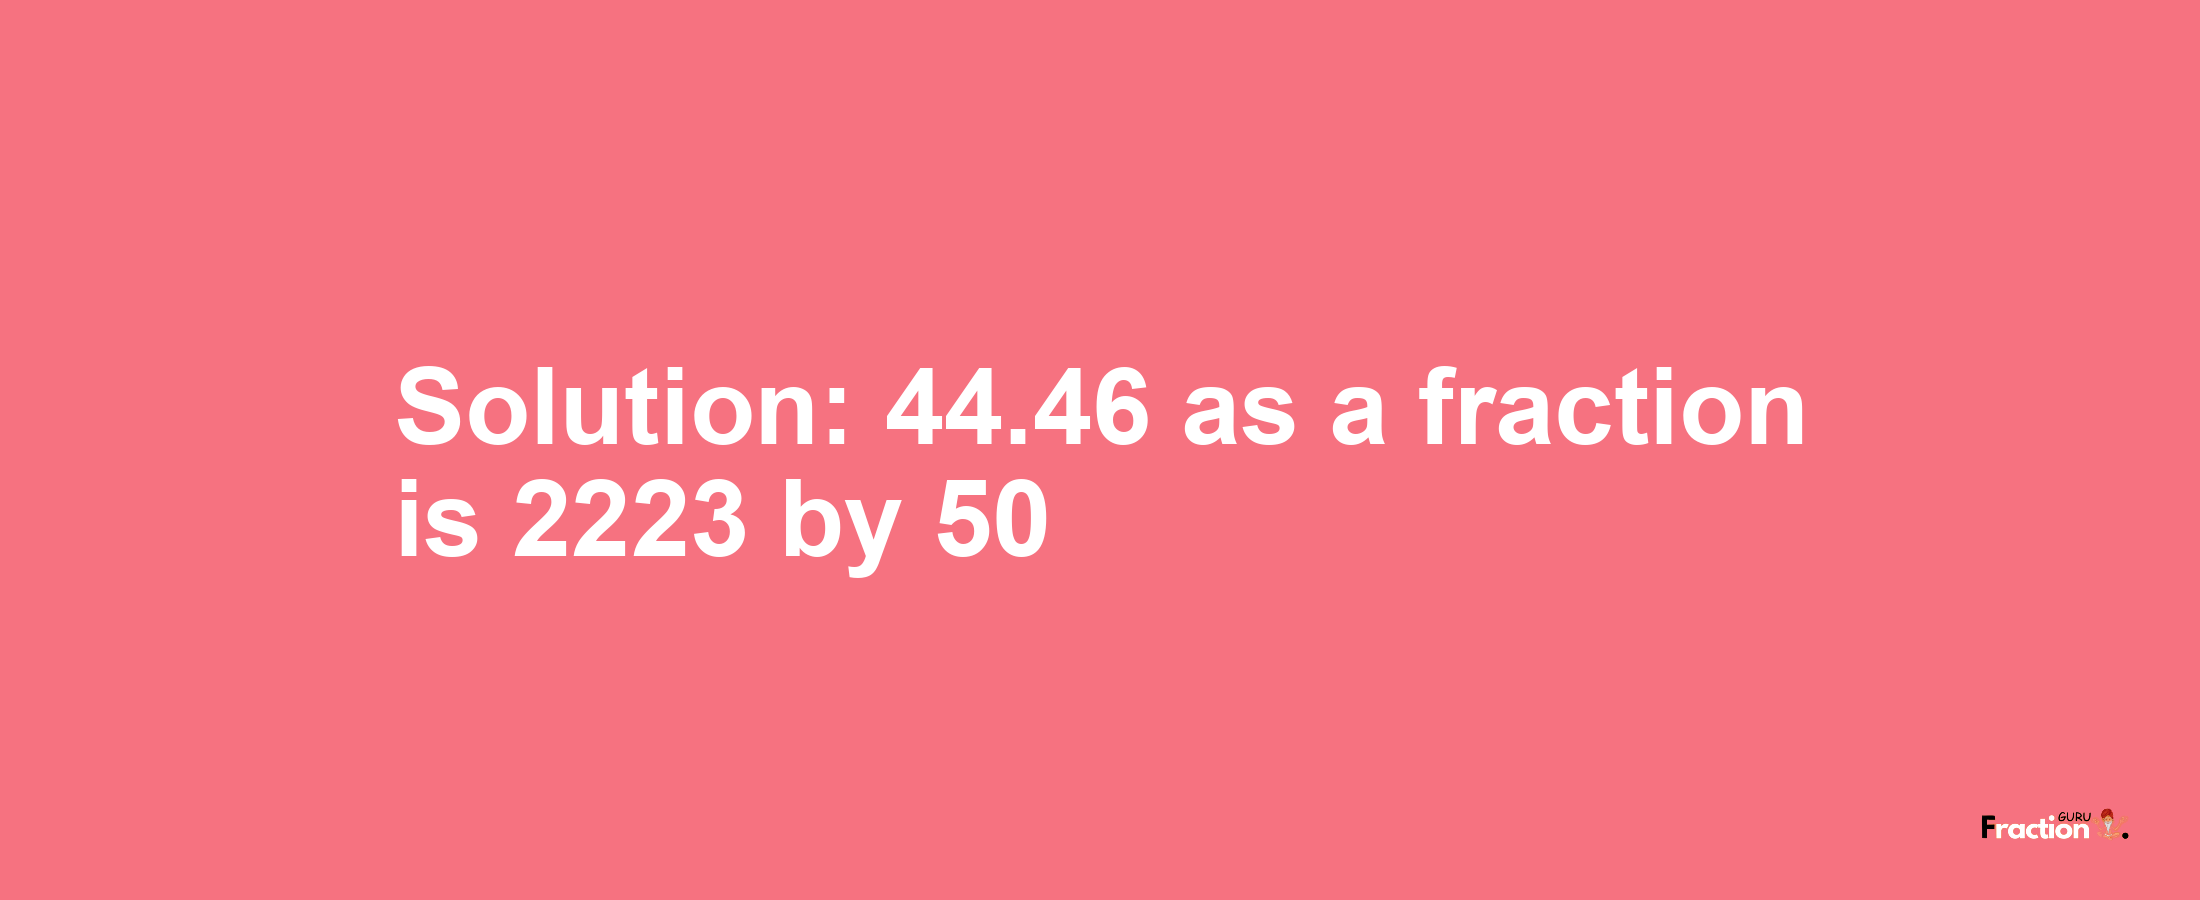 Solution:44.46 as a fraction is 2223/50